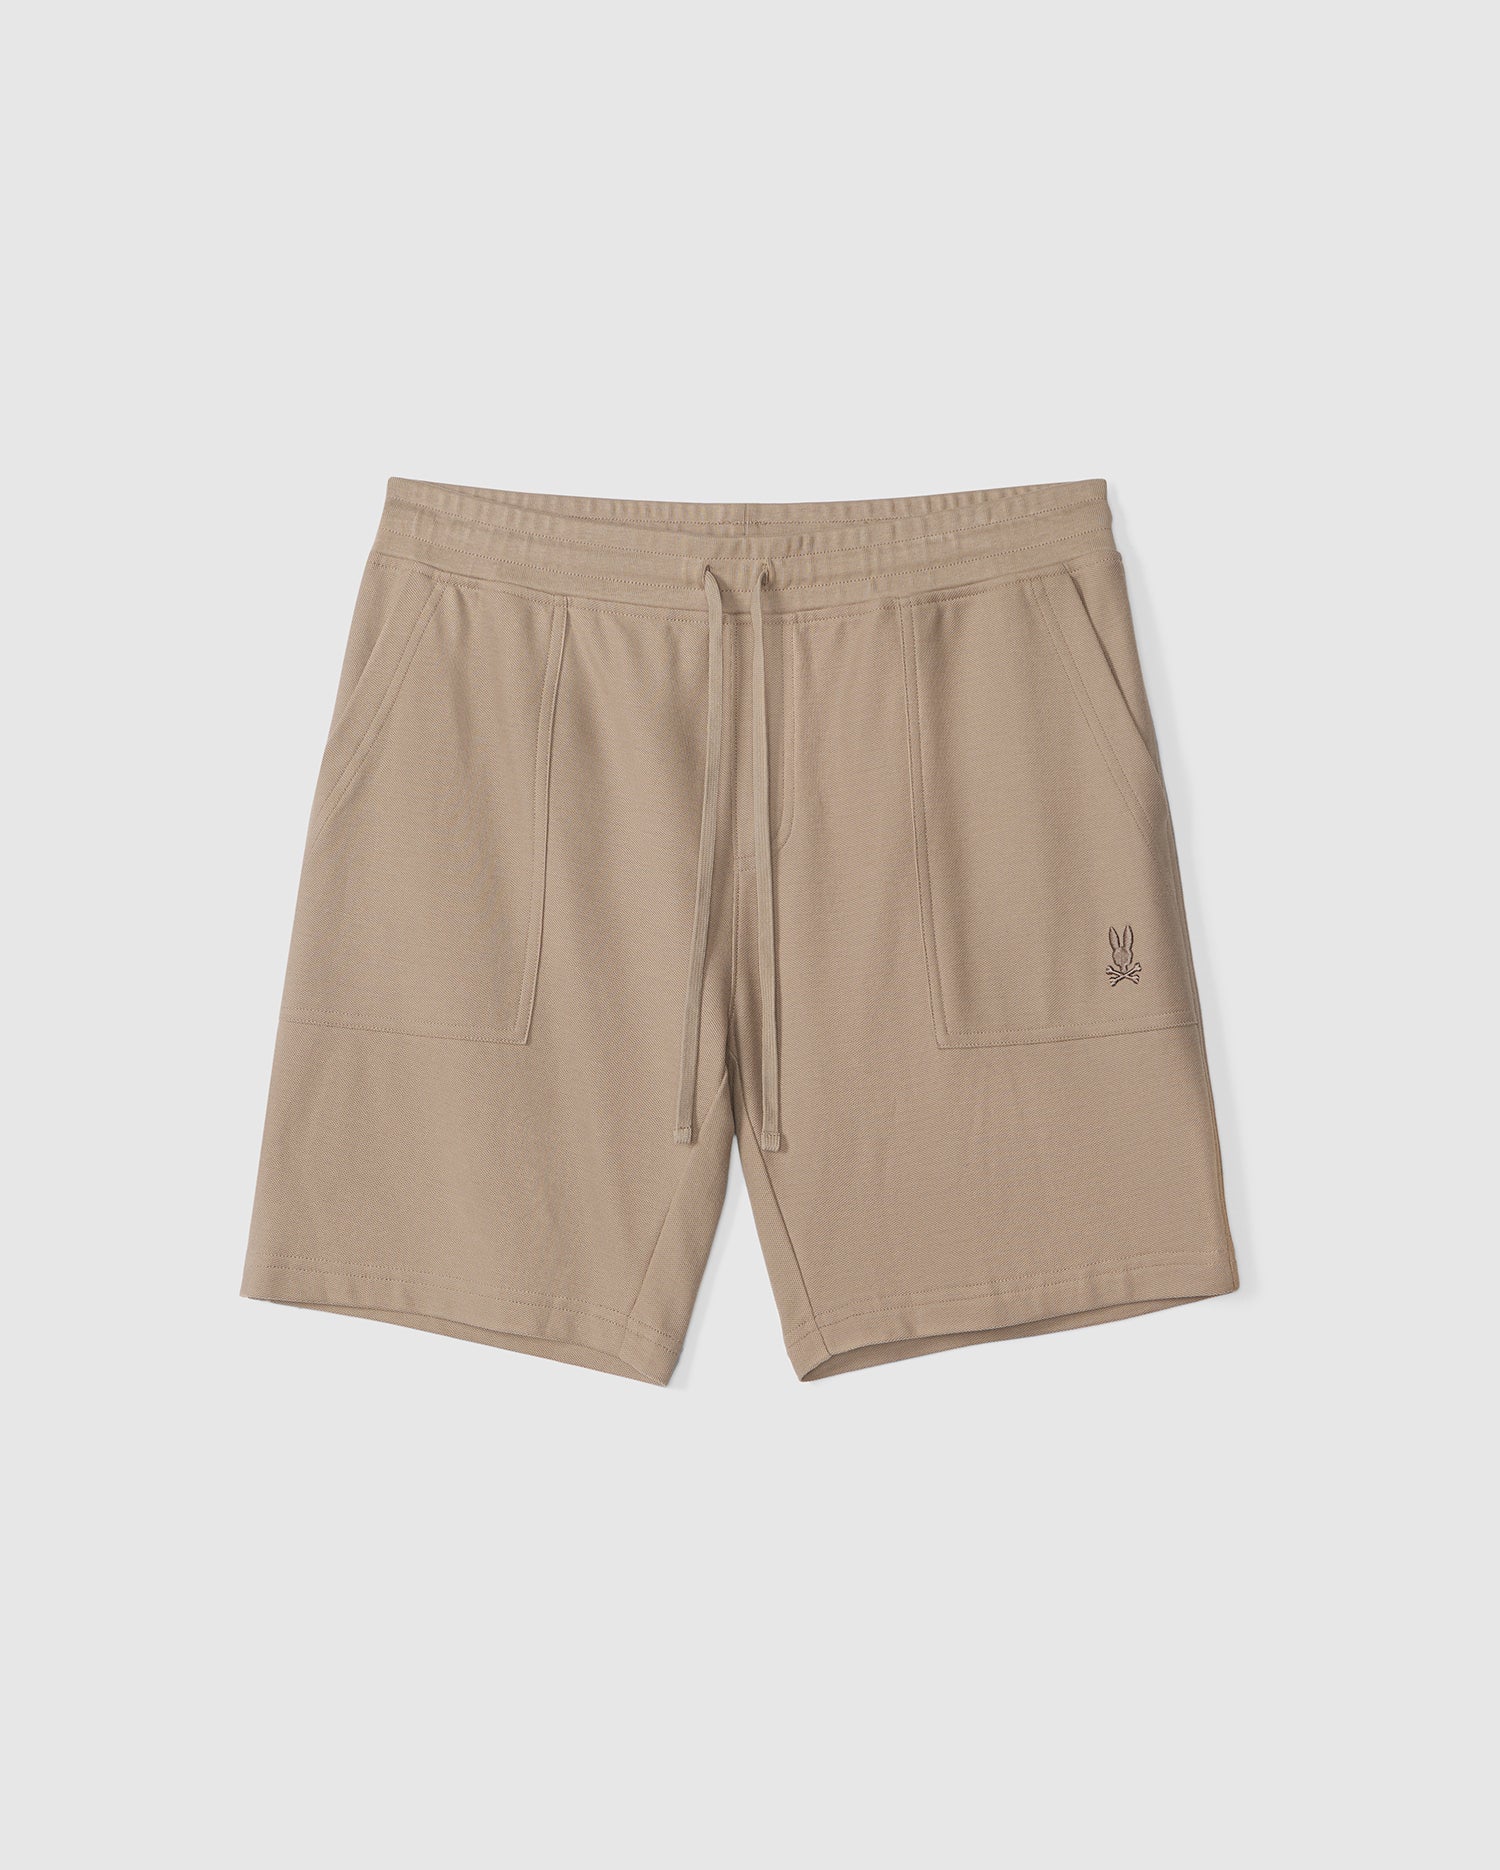 A pair of beige MENS STANFORD LIGHT PIQUE SWEATSHORT - B6R344B200 by Psycho Bunny with an elastic waistband and drawstring. The shorts, crafted from soft Pima cotton, boast two front pockets and a small embroidered bunny design on the left pocket. This comfortable apparel is a stylish wardrobe staple. The background is plain white.